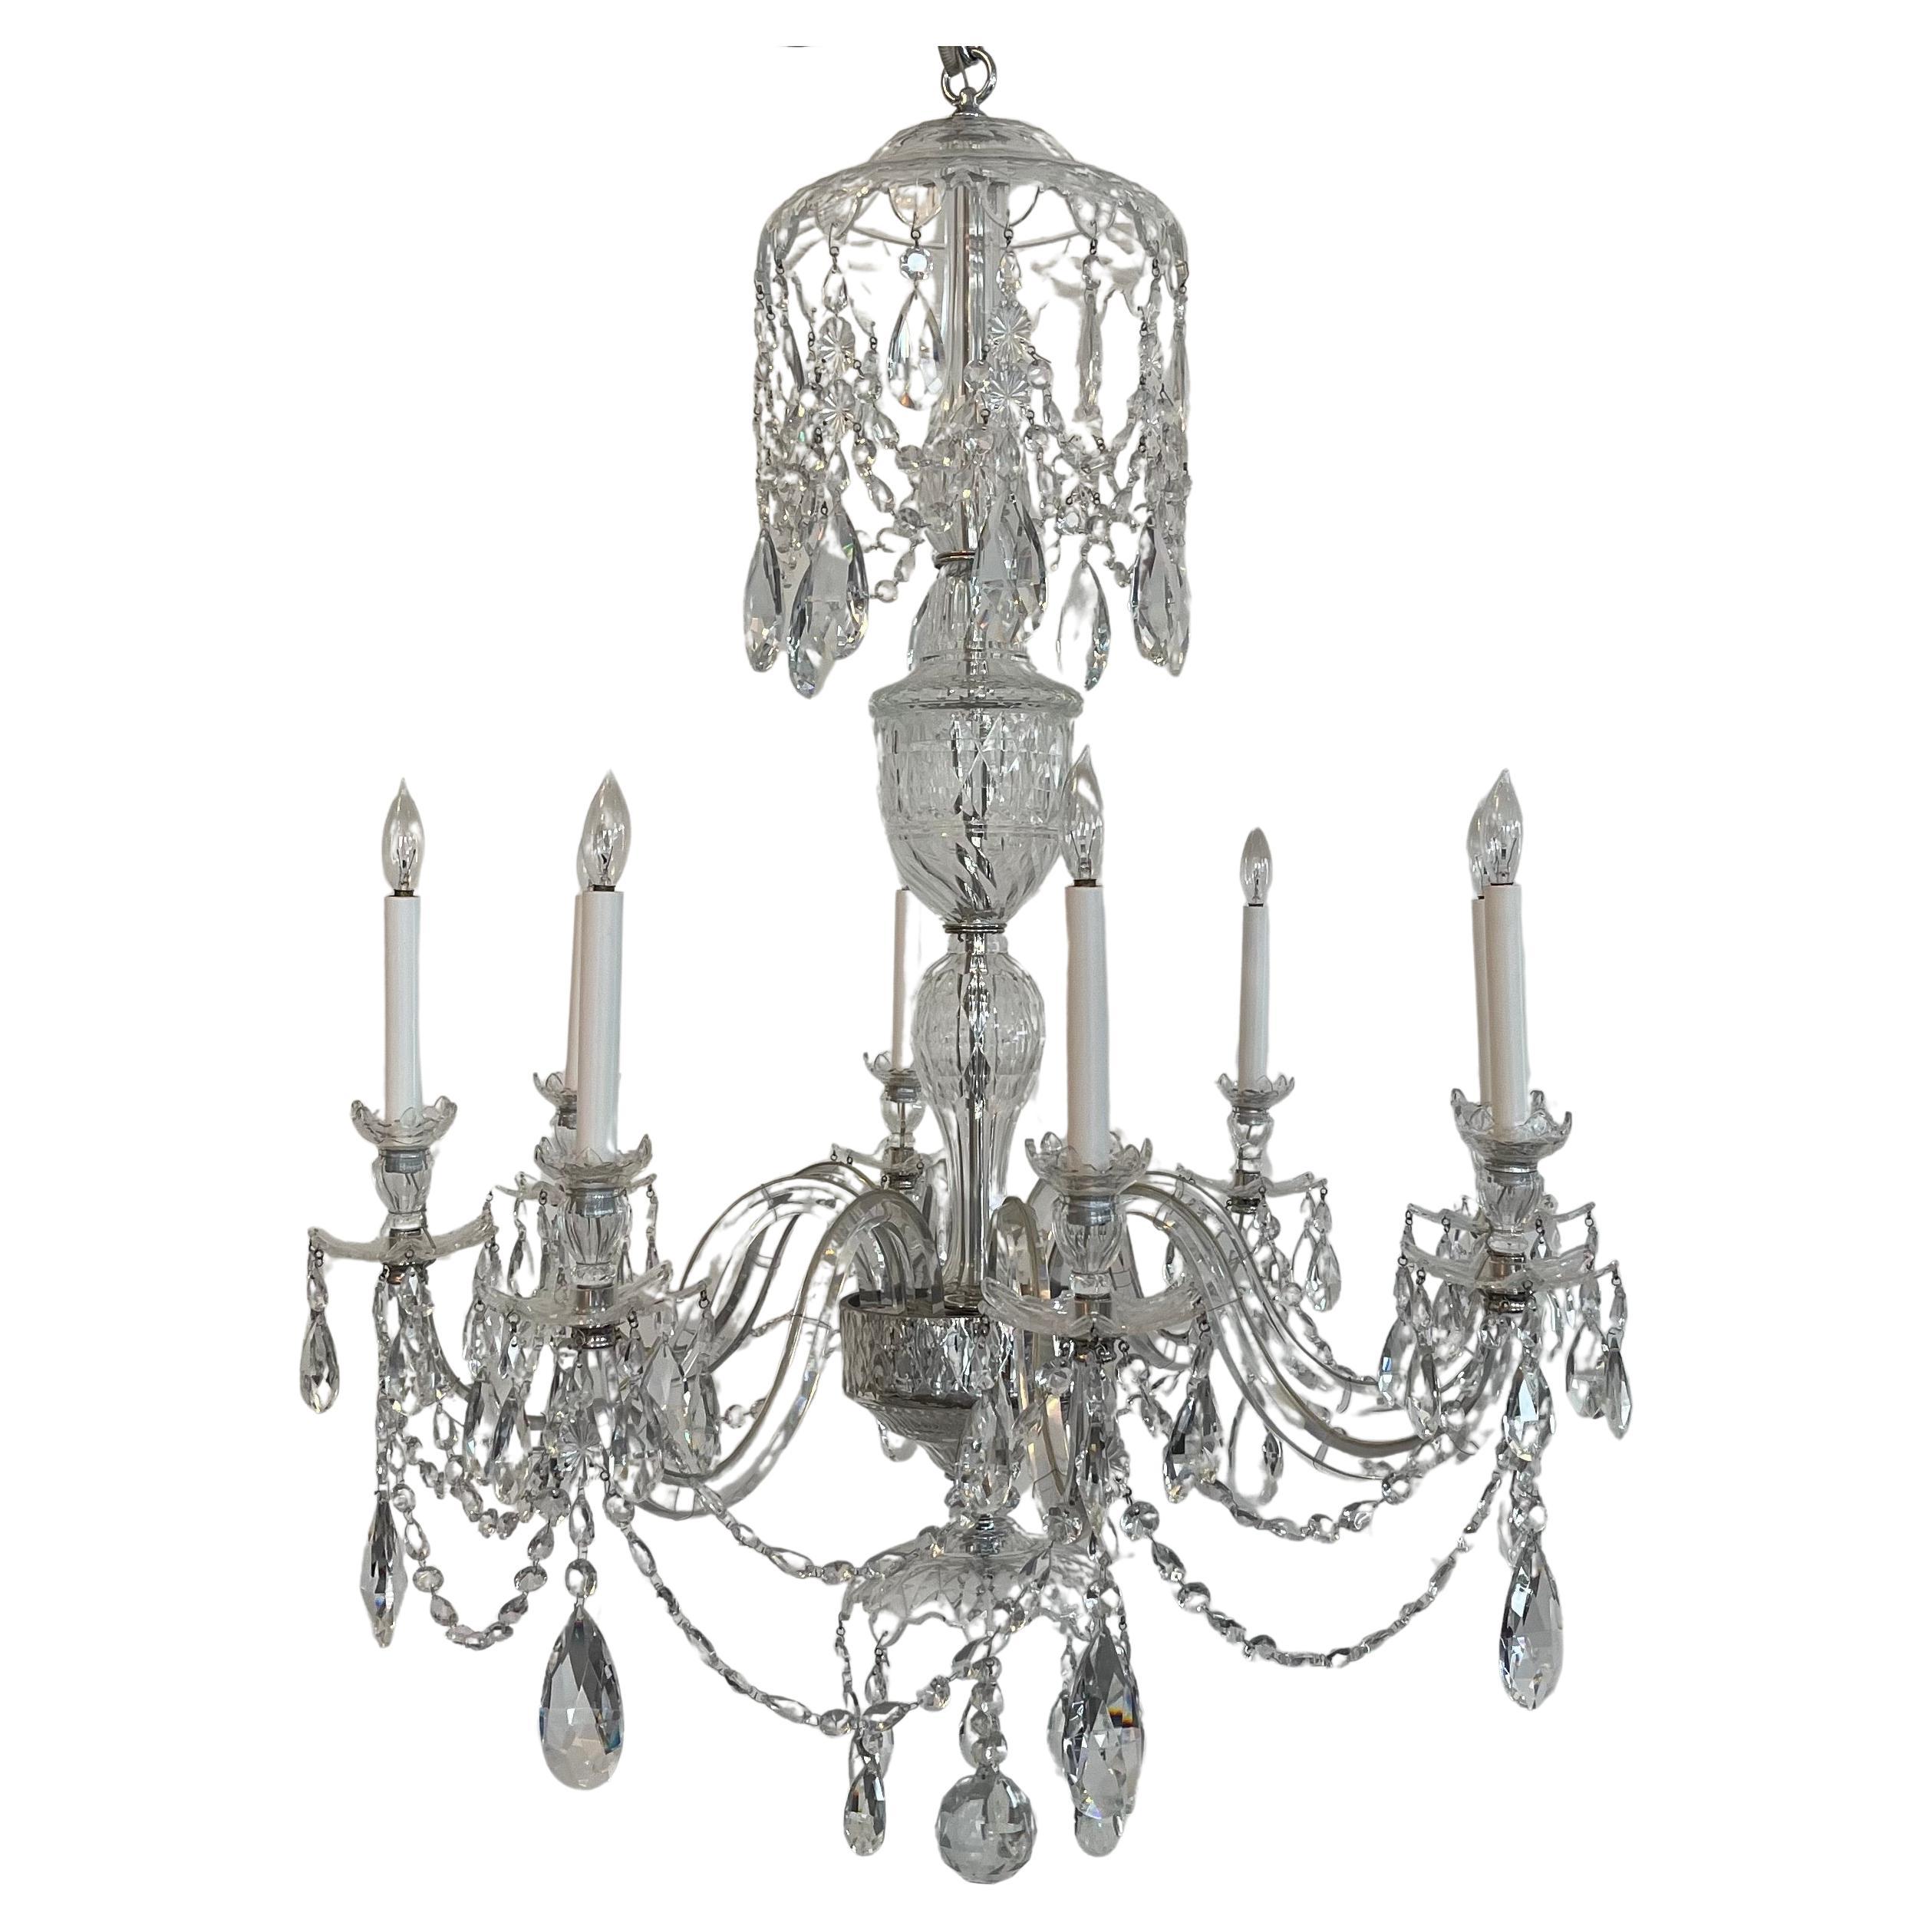 Exquisite Large English Georgian Crystal Swag 8 Light Chandelier   